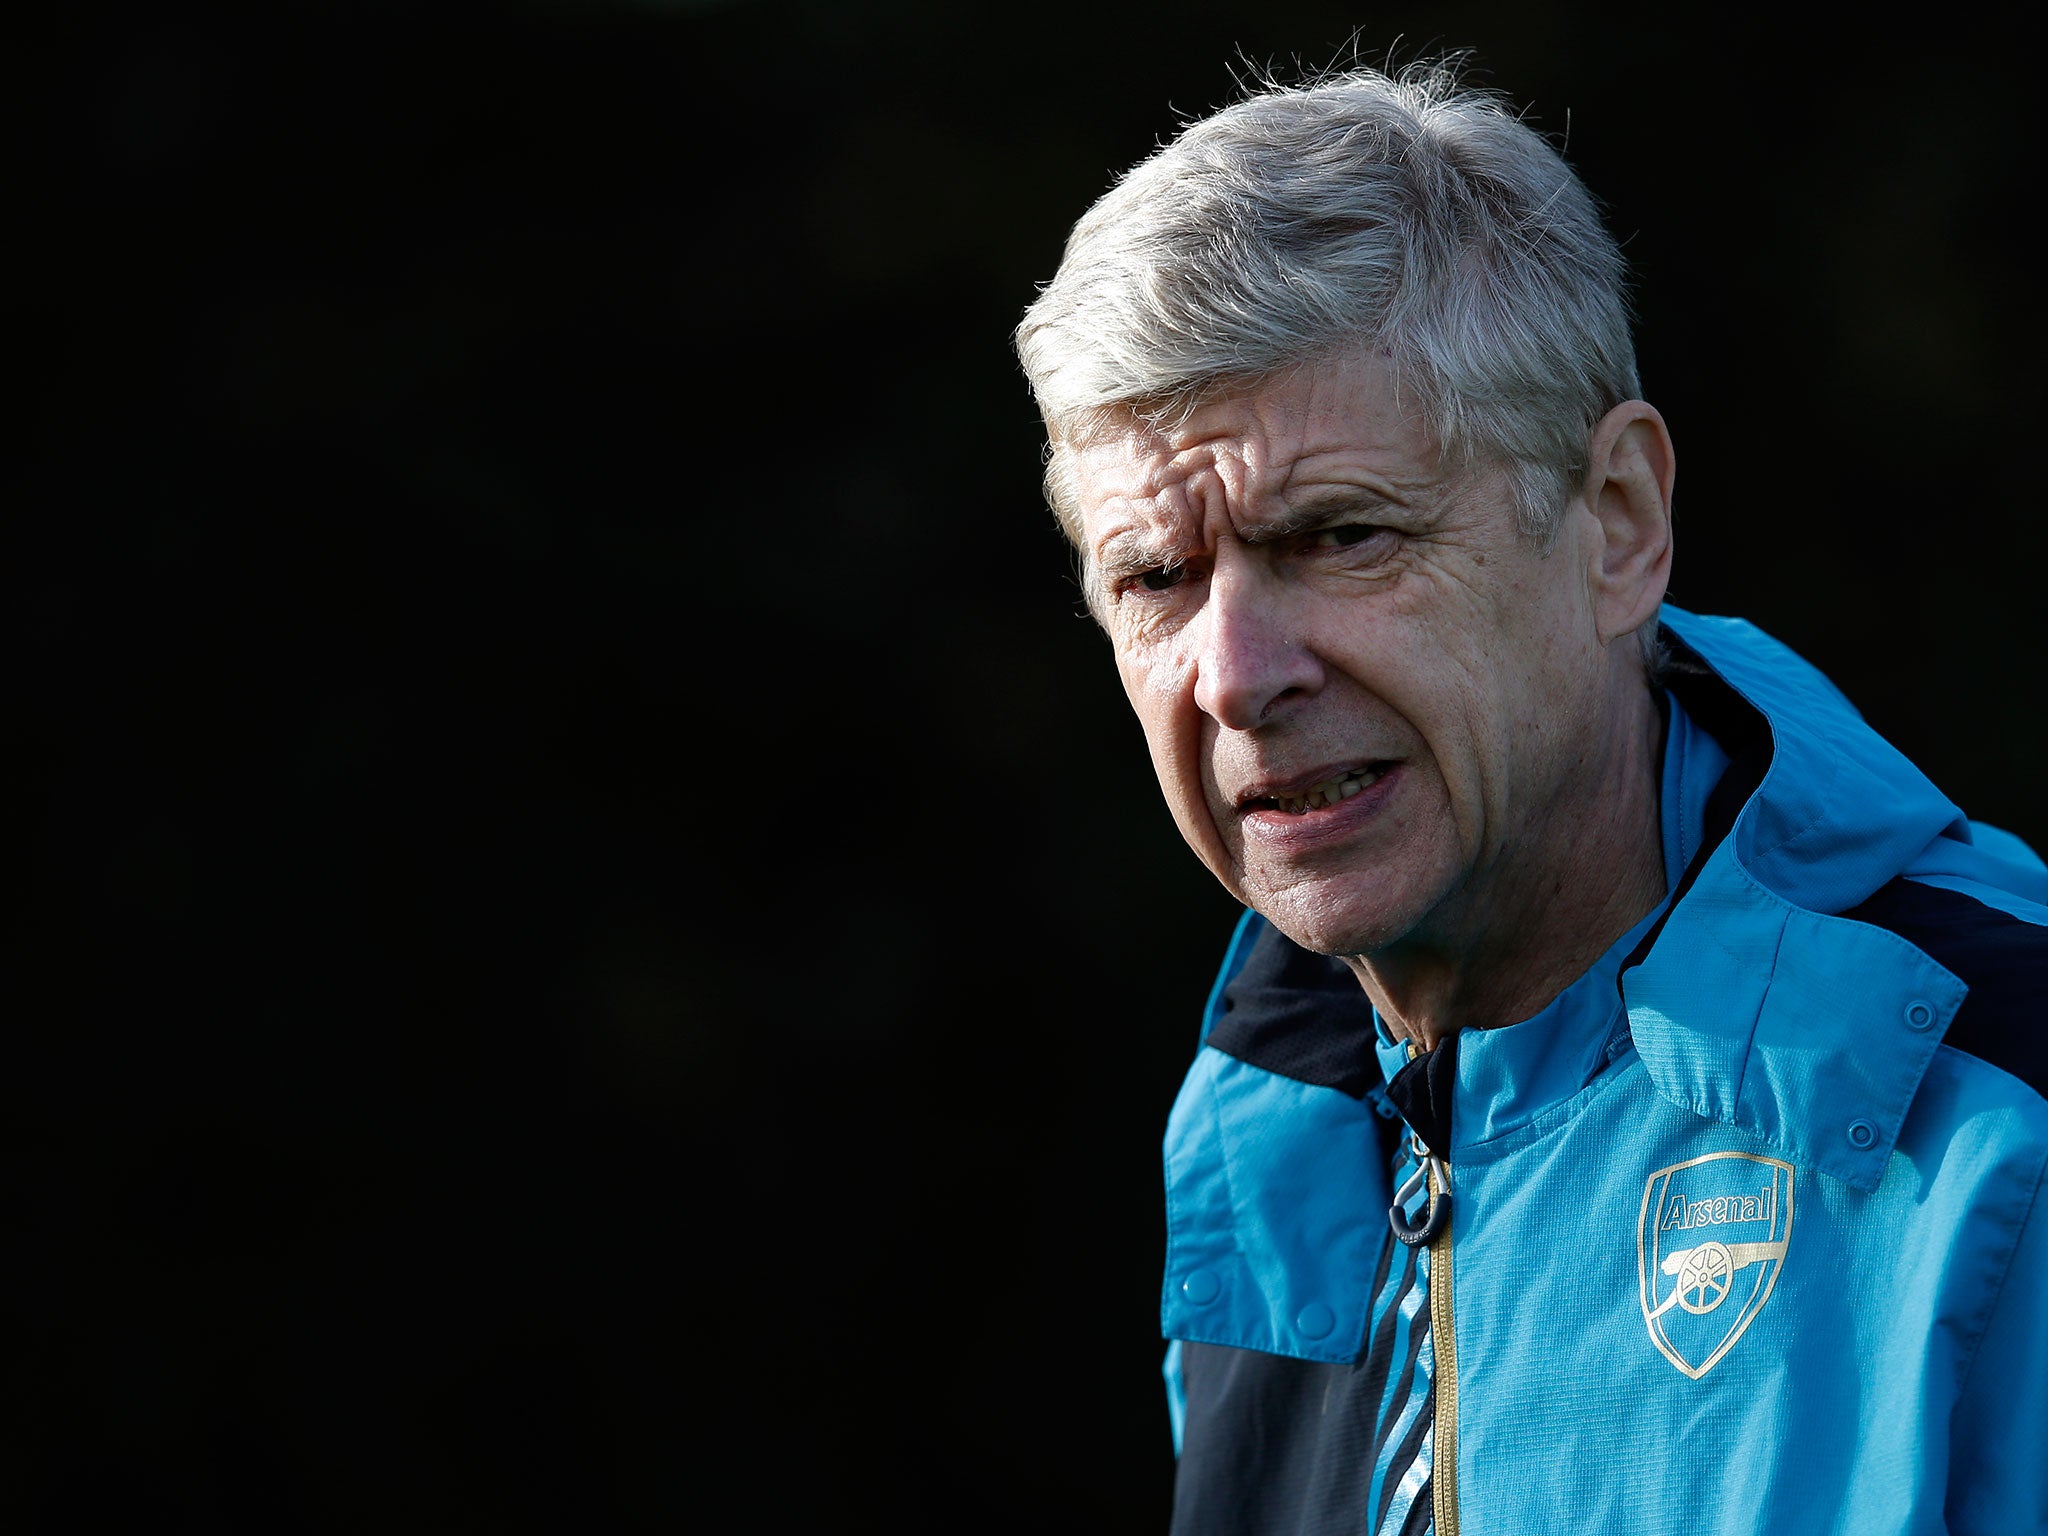 Arsenal manager Arsene Wenger has vowed to take the Europa League seriously